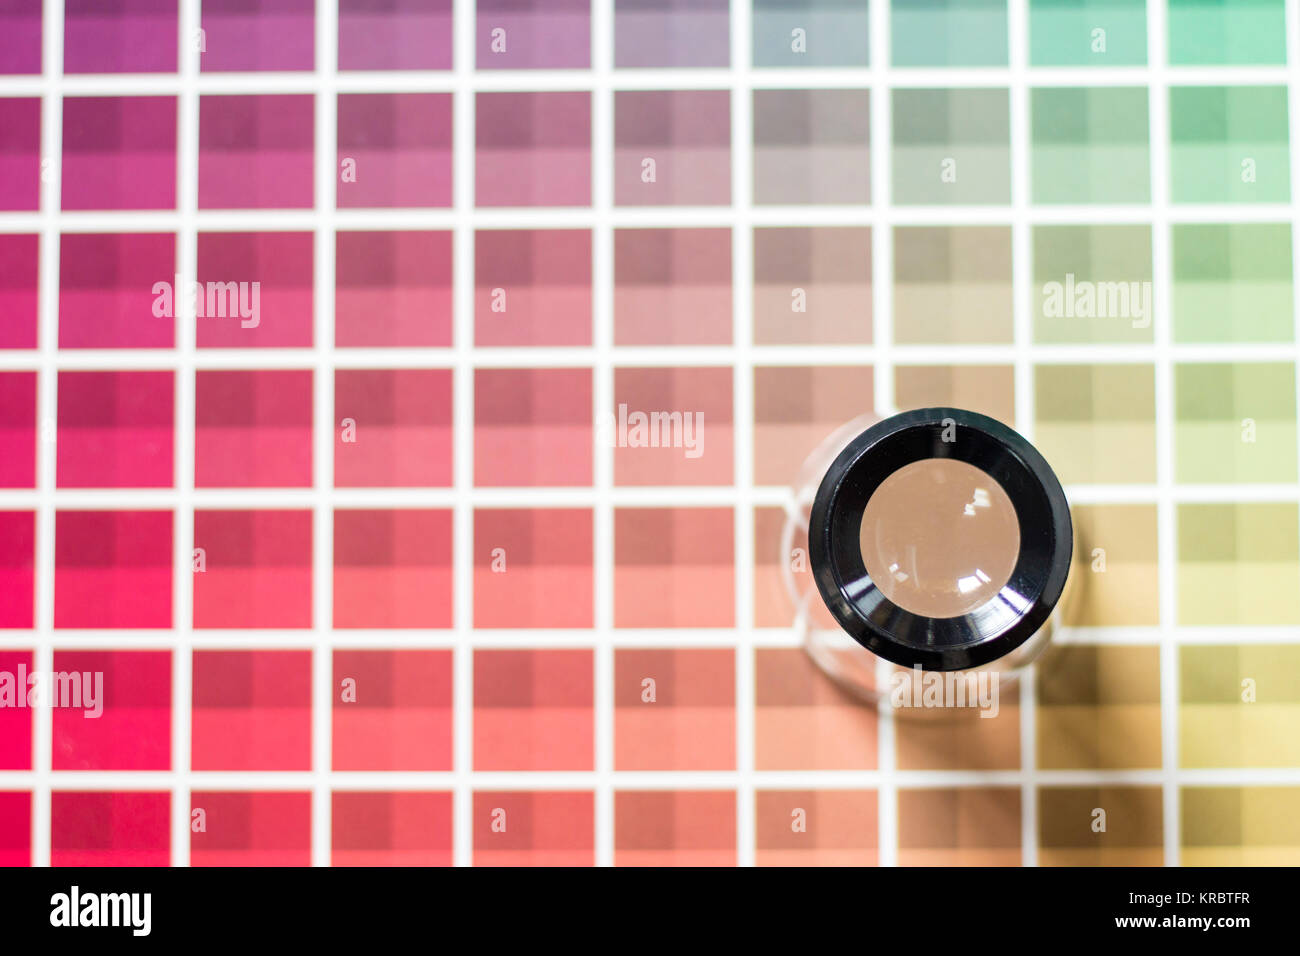 Magnifier on a color chart Stock Photo